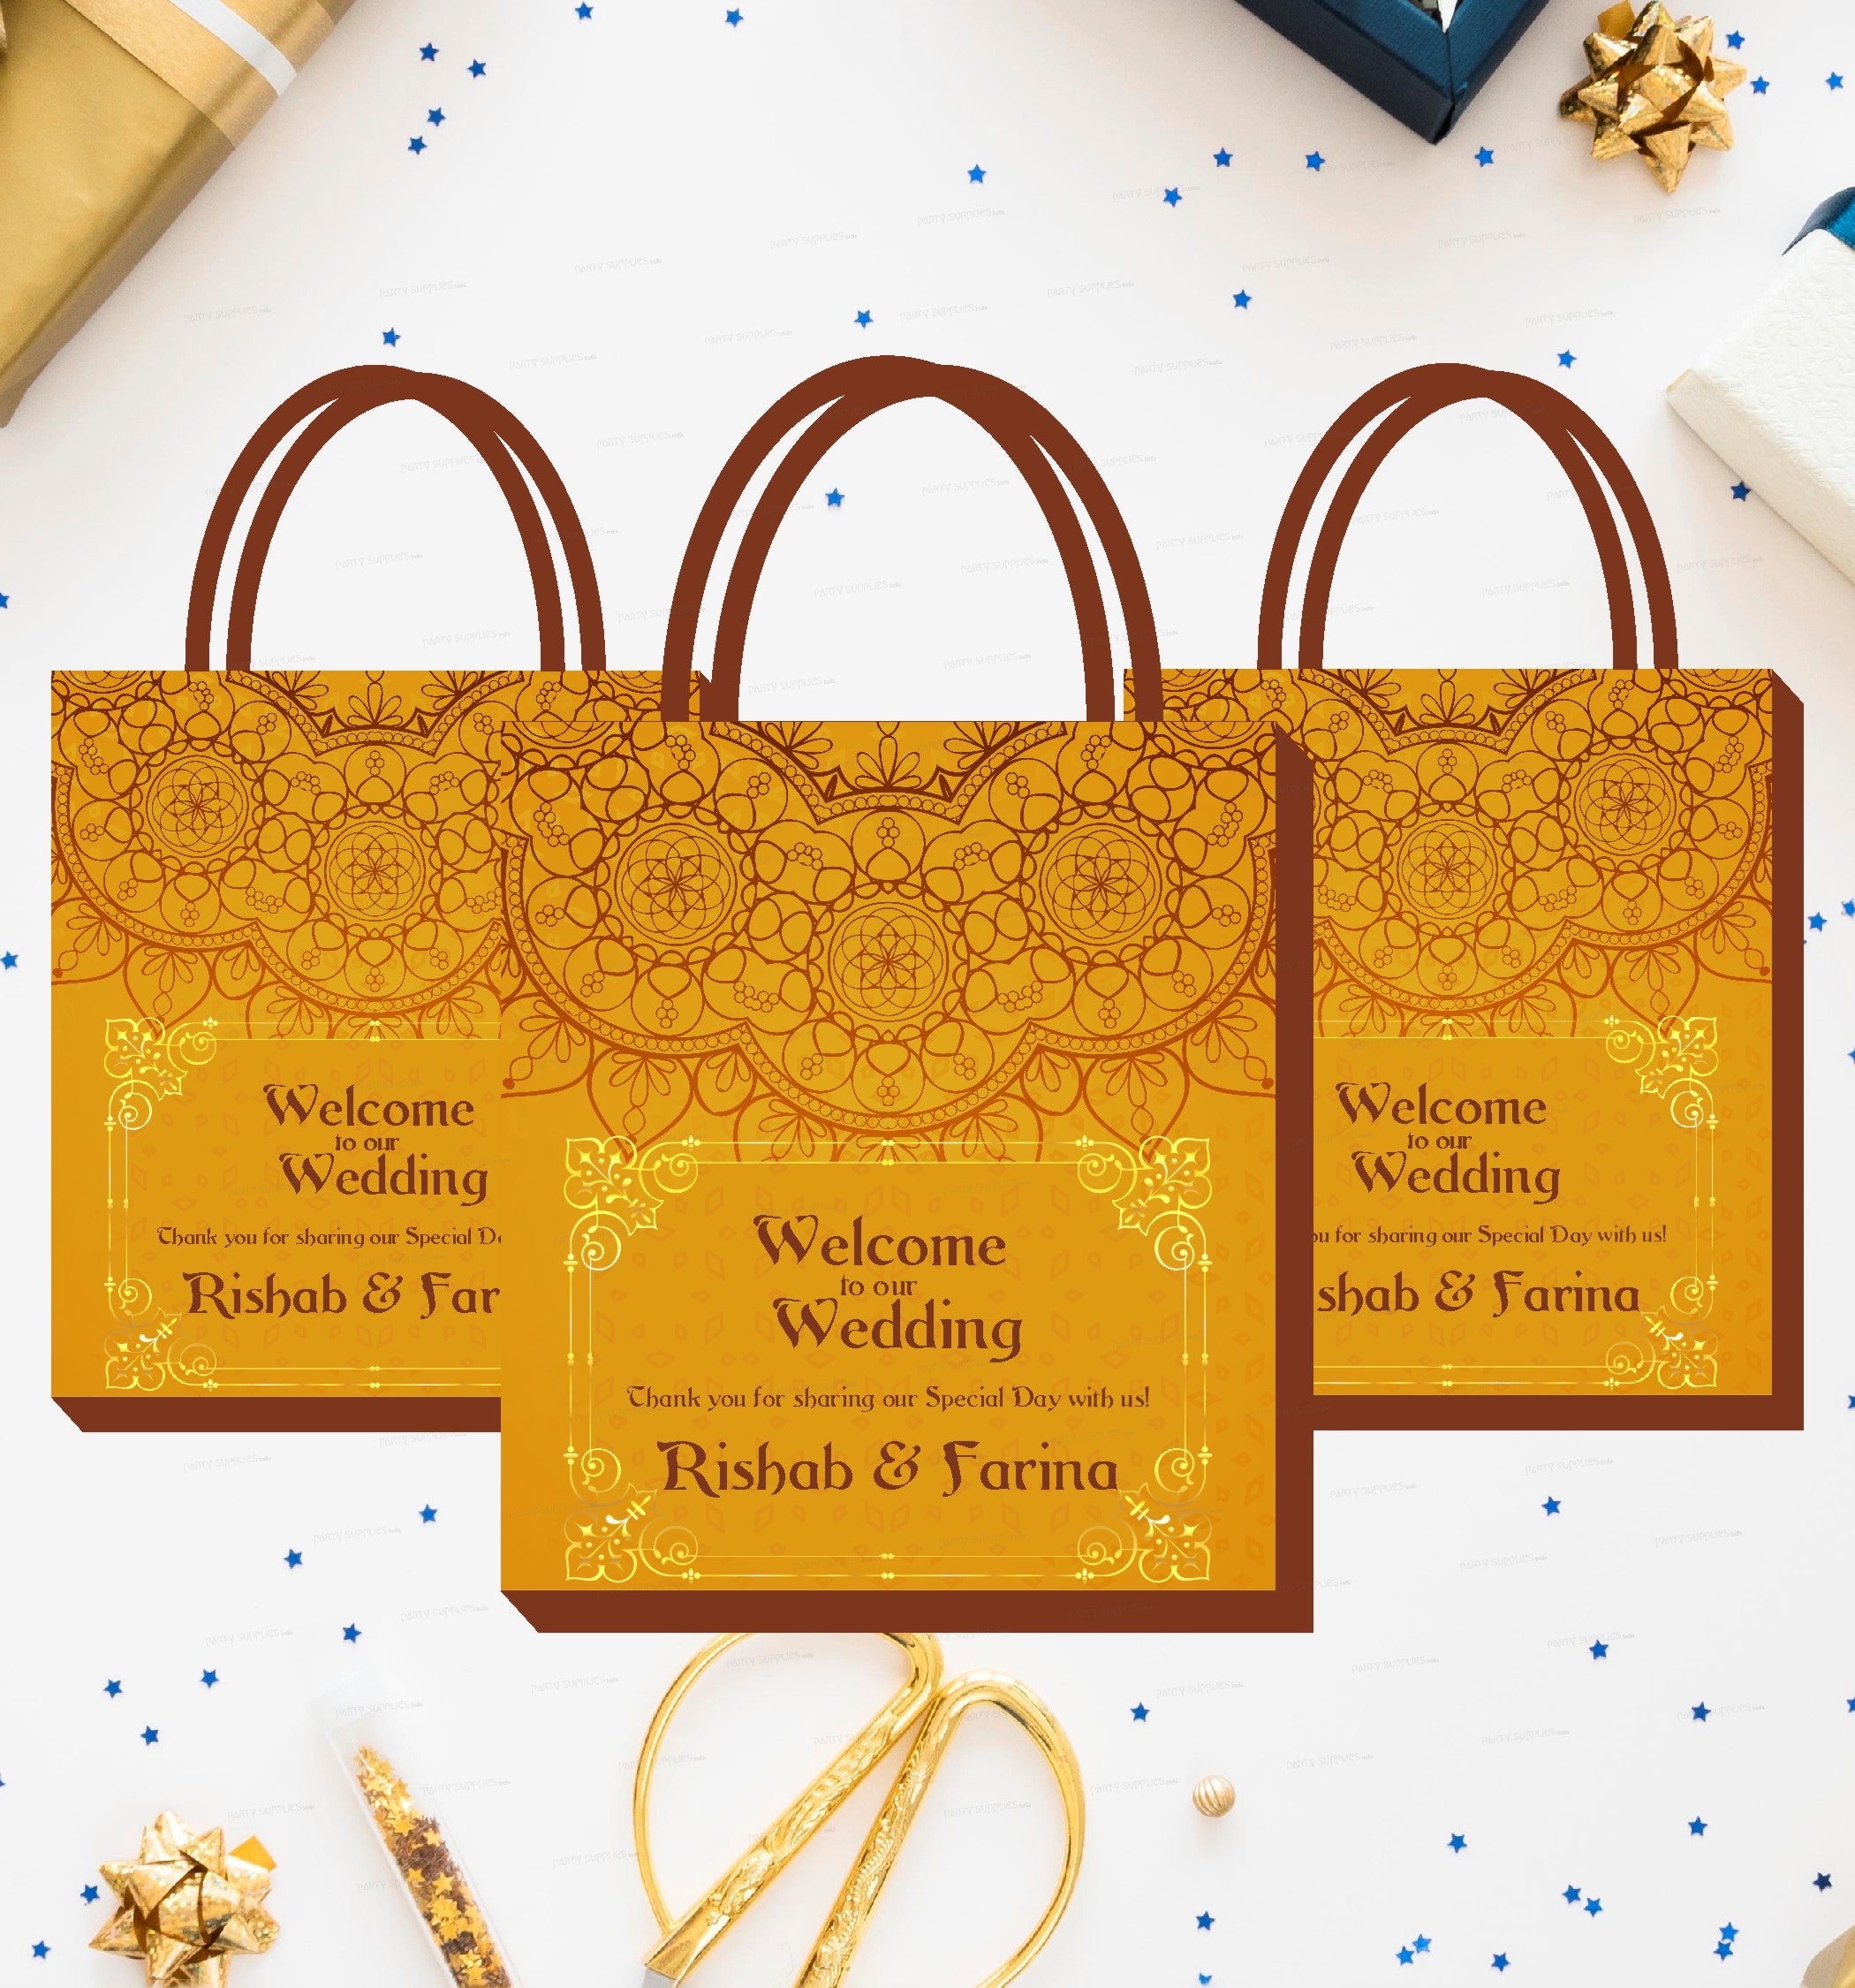 Paper to Bag - Chennai | Wedding Favors & Gifts